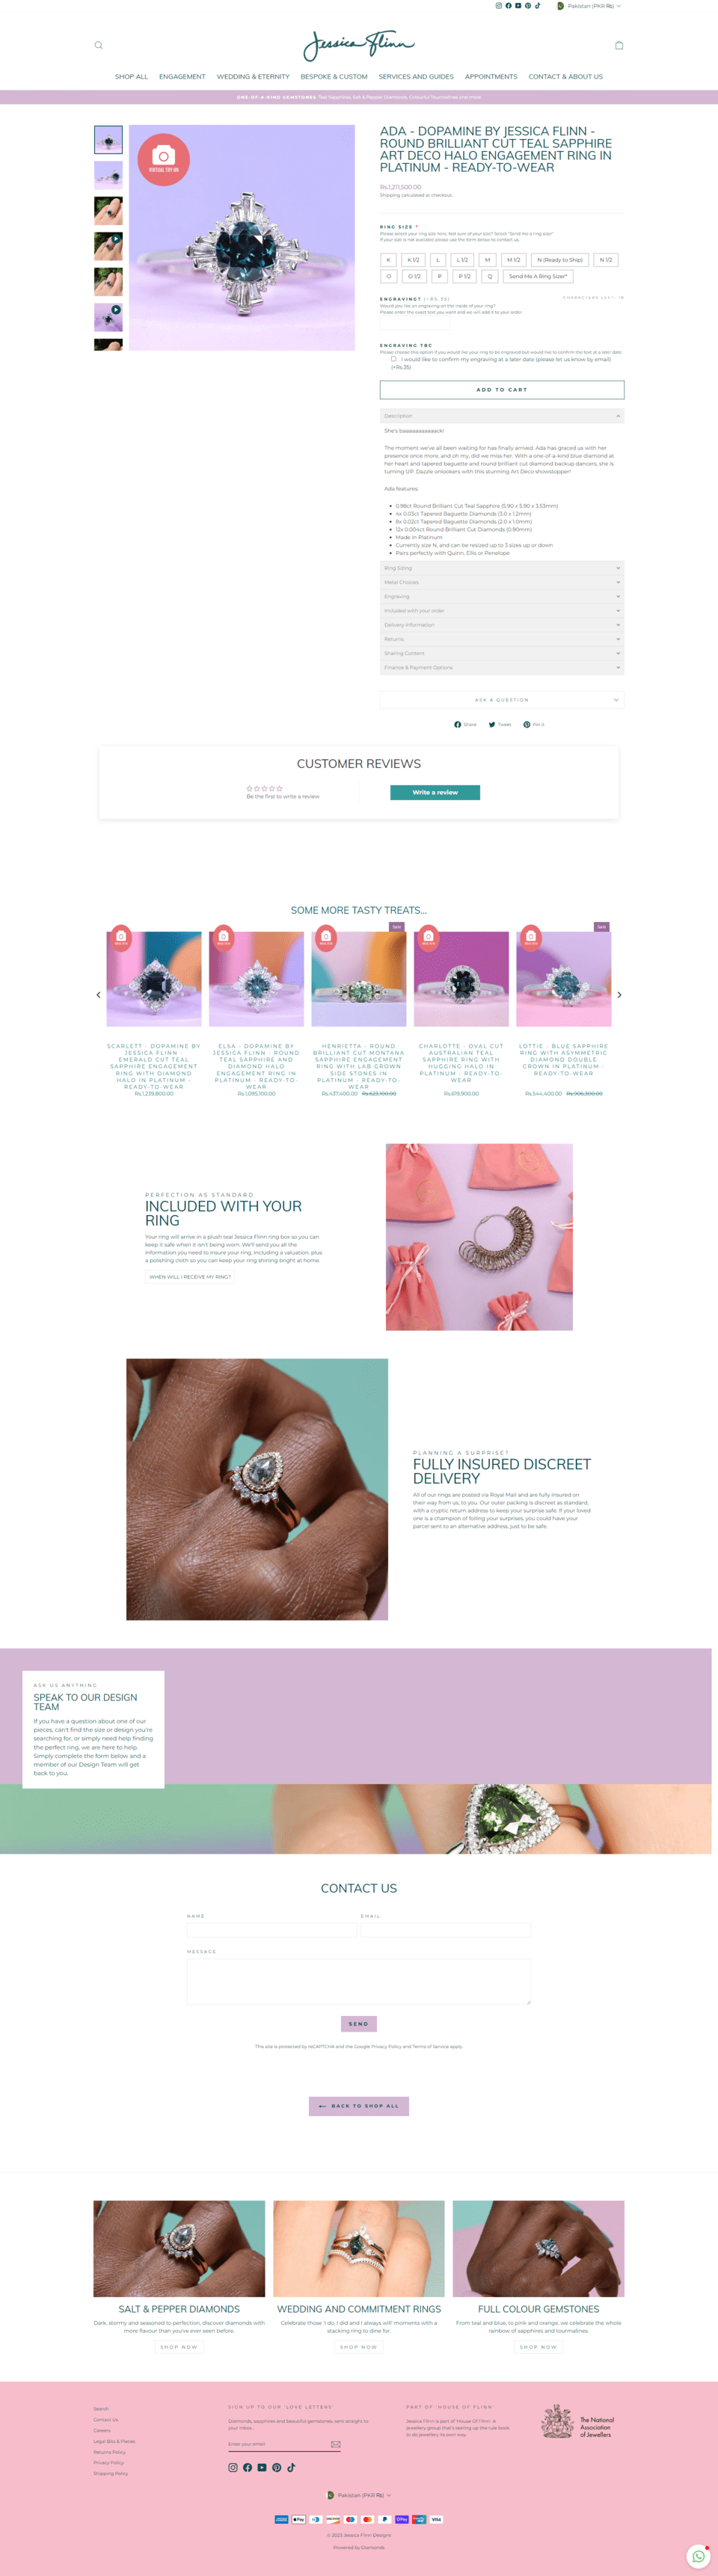 detail page of each product or ring with complete description